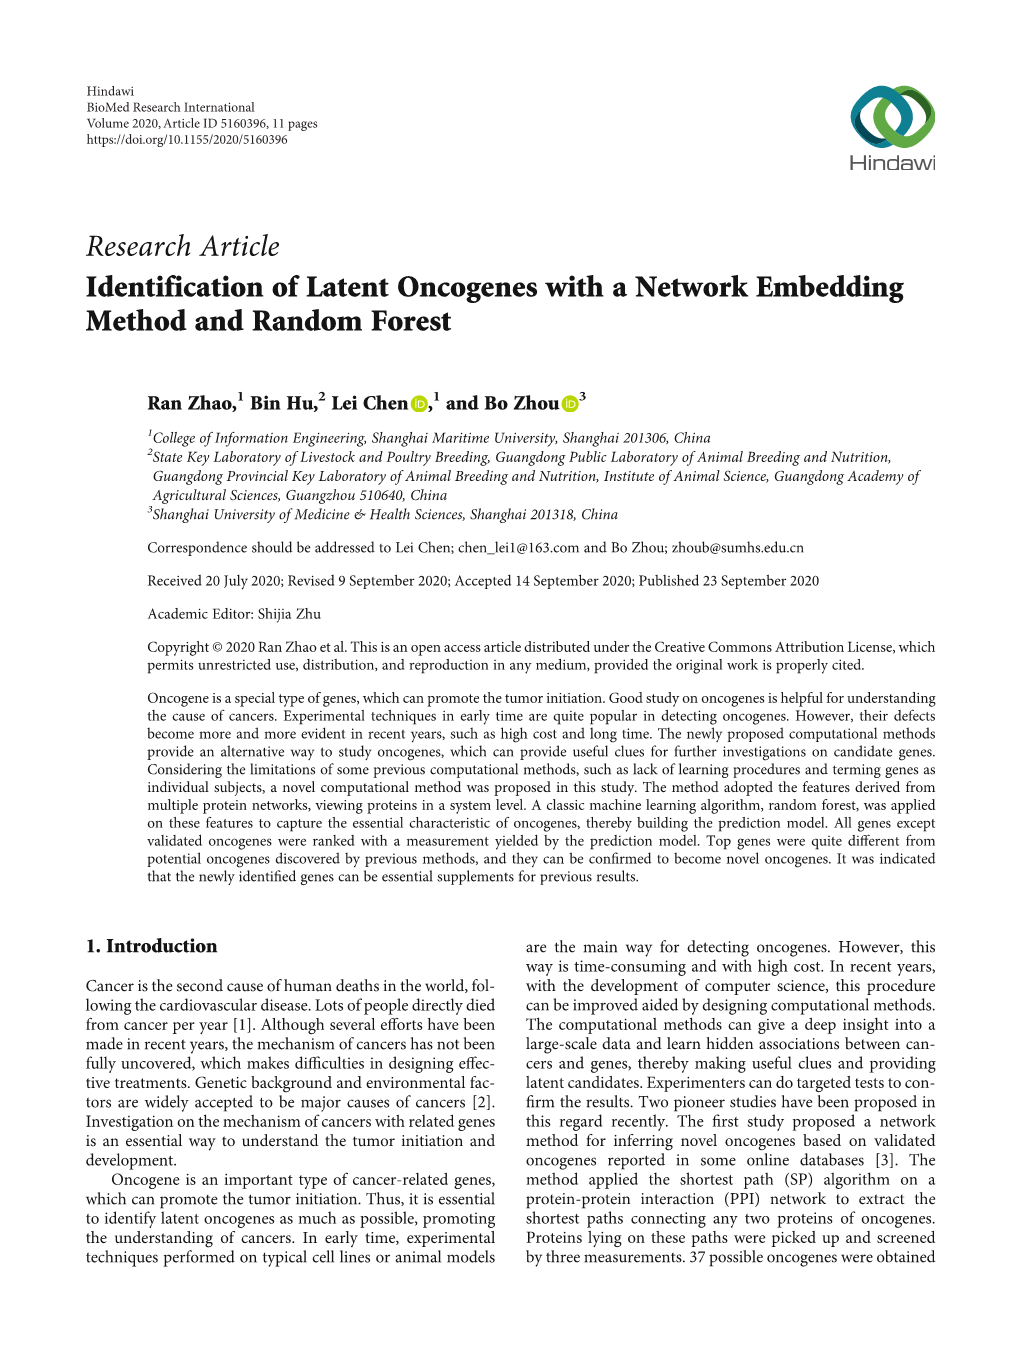 Identification of Latent Oncogenes with a Network Embedding Method and Random Forest